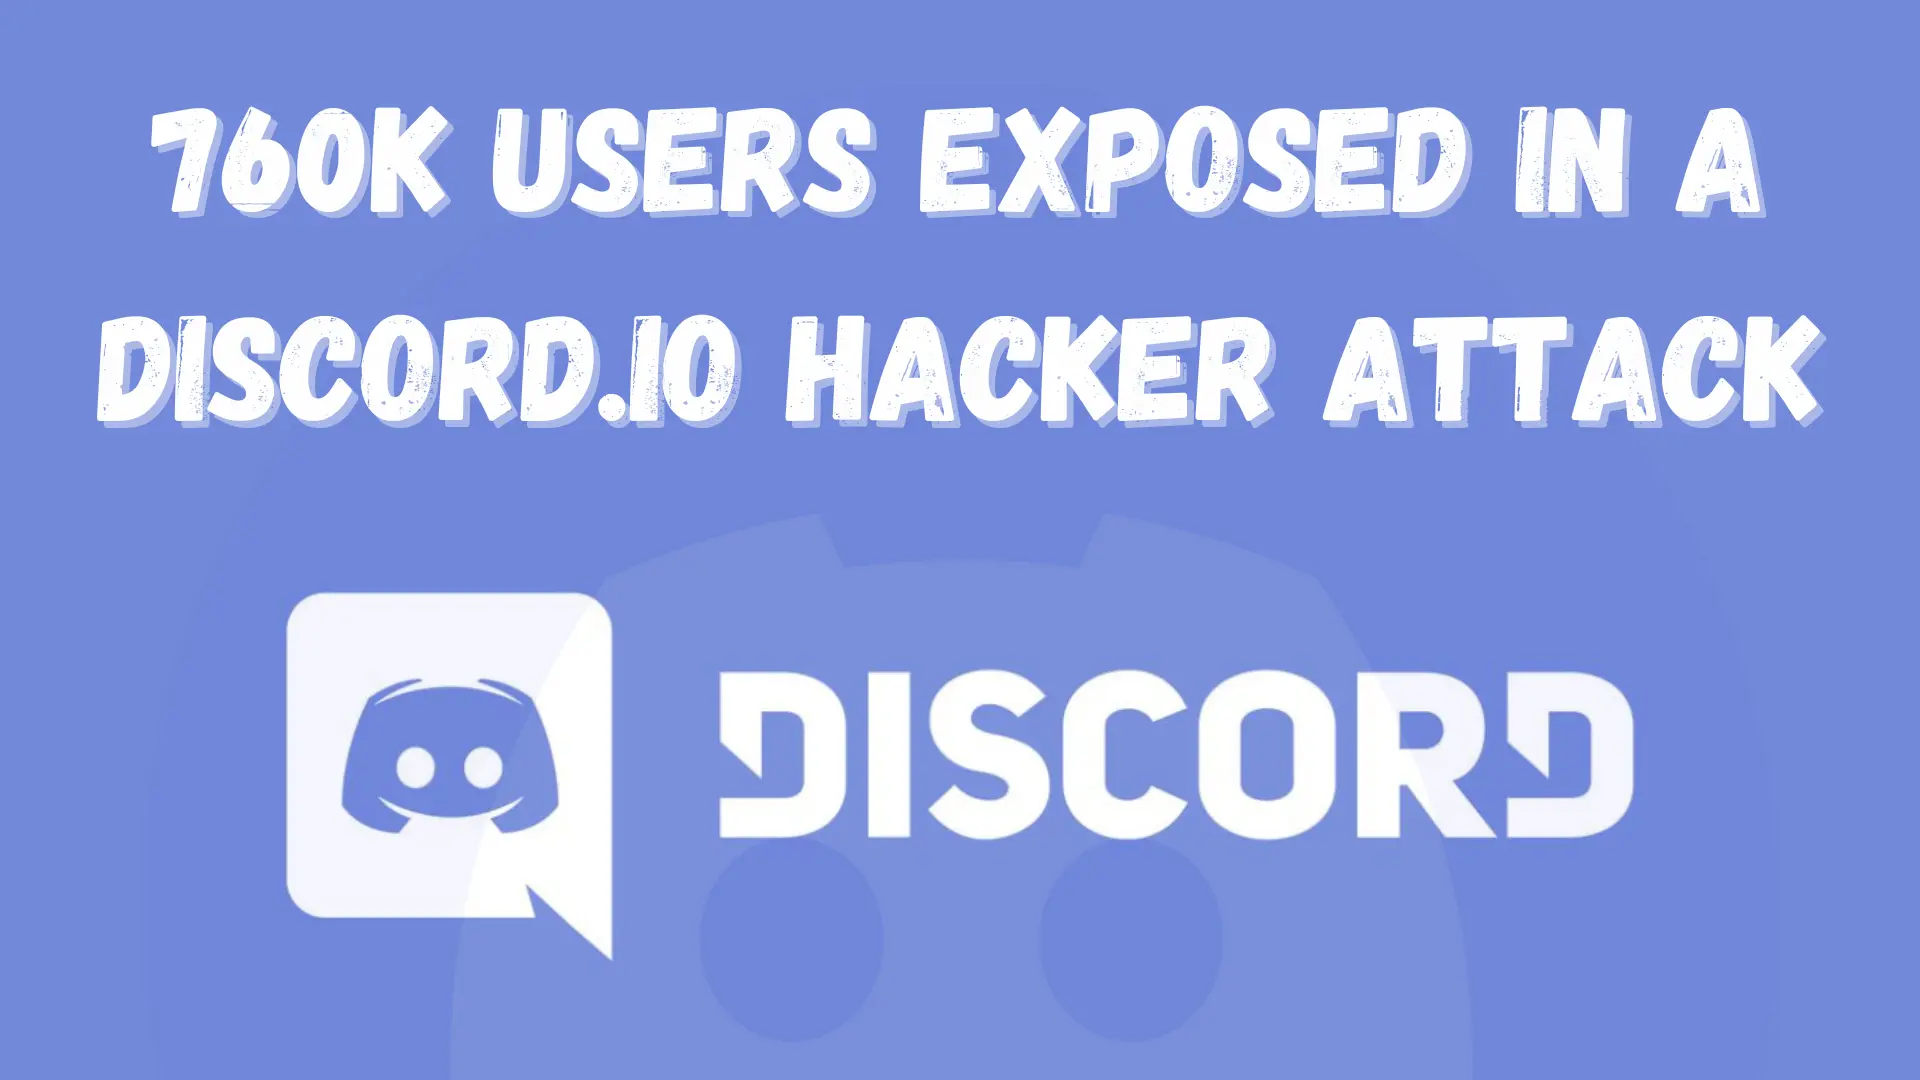 760K Users Affected by a Discord.io Hacker Attack